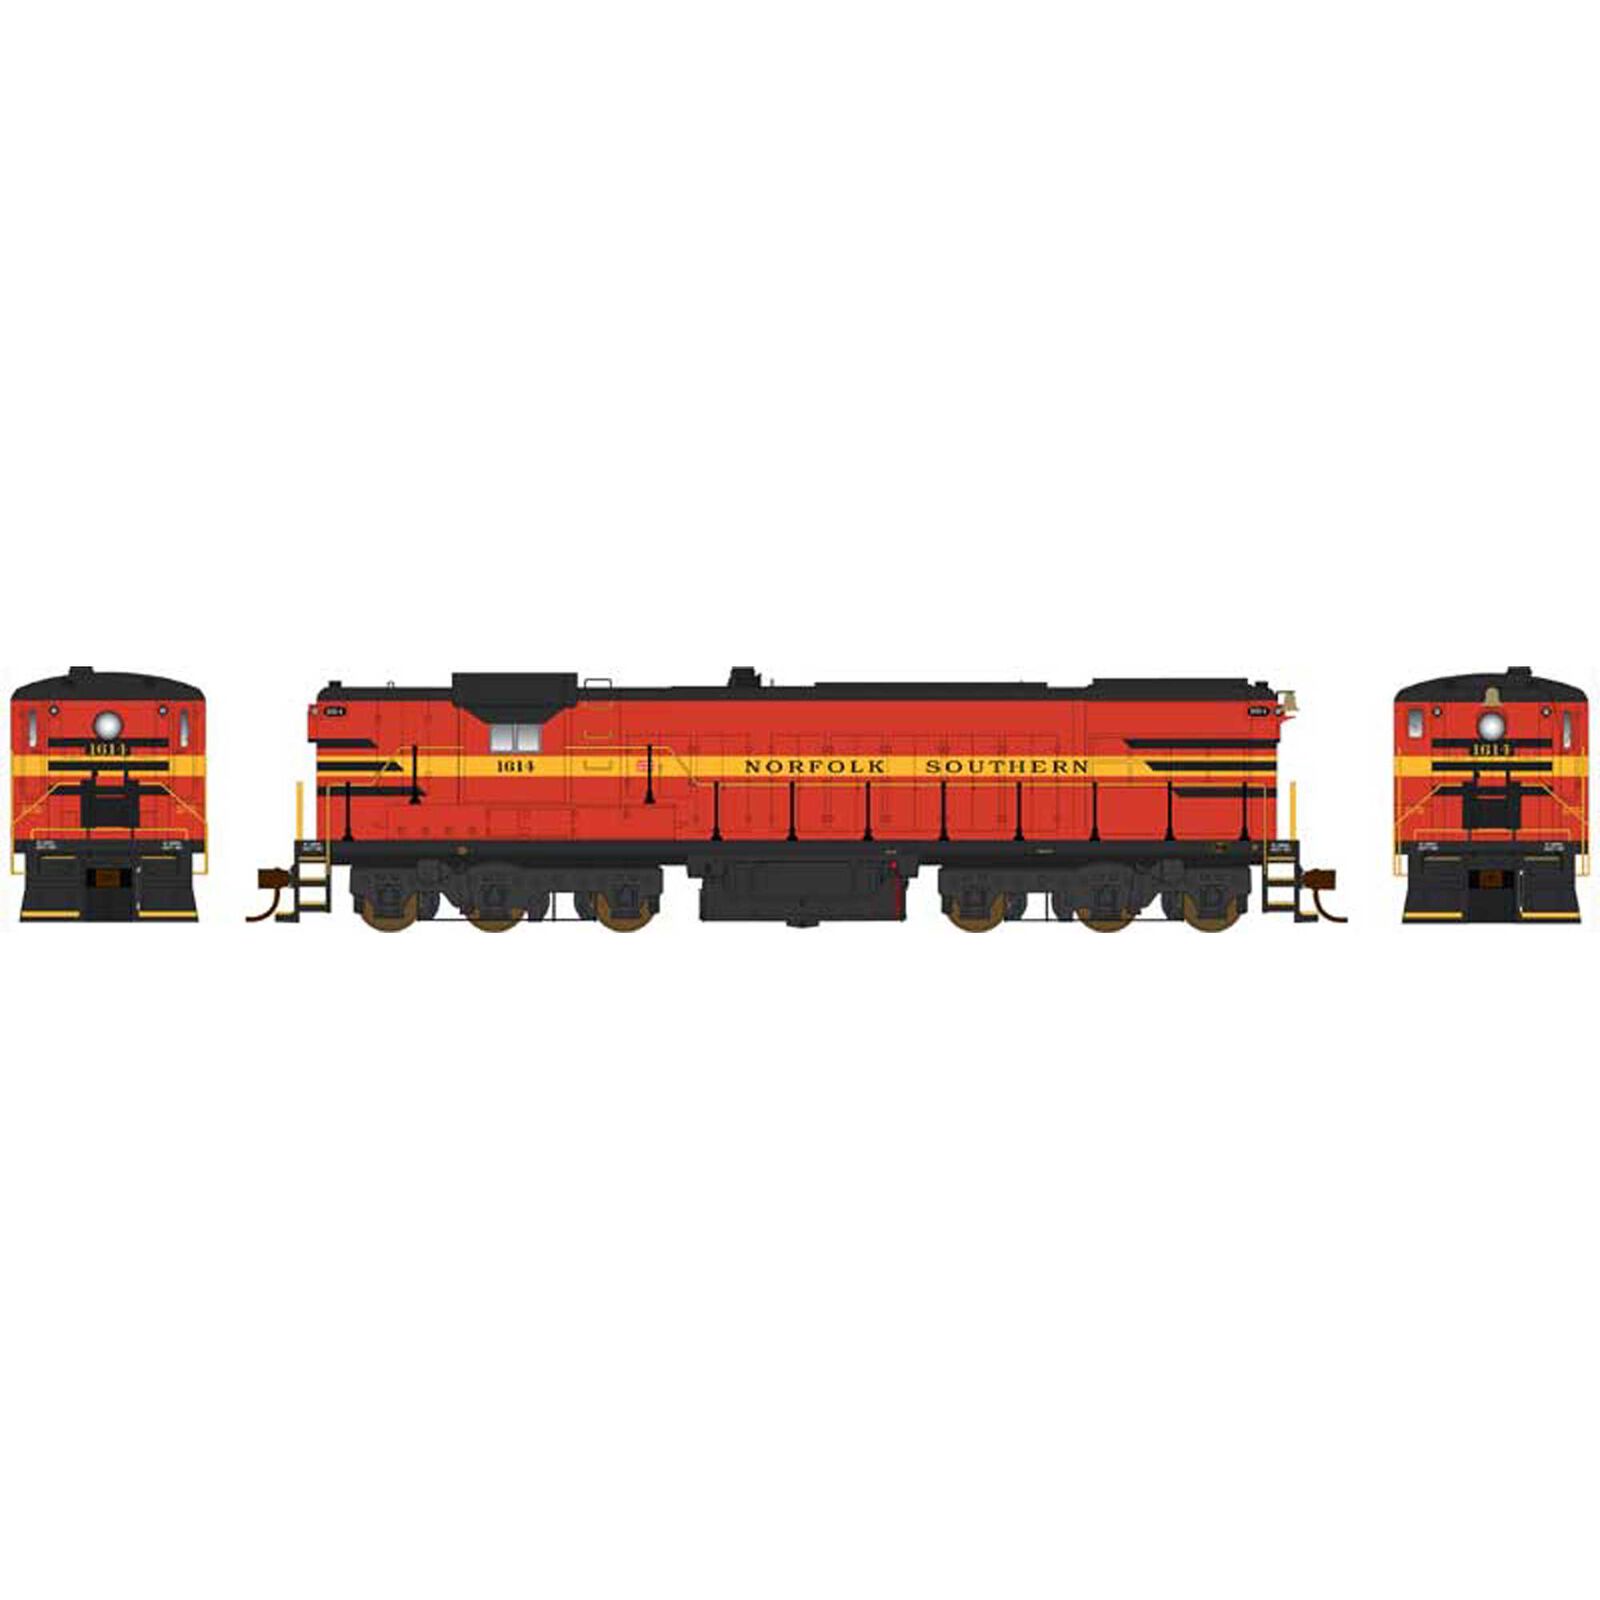 HO AS-416 NS Loco #1615 with sound